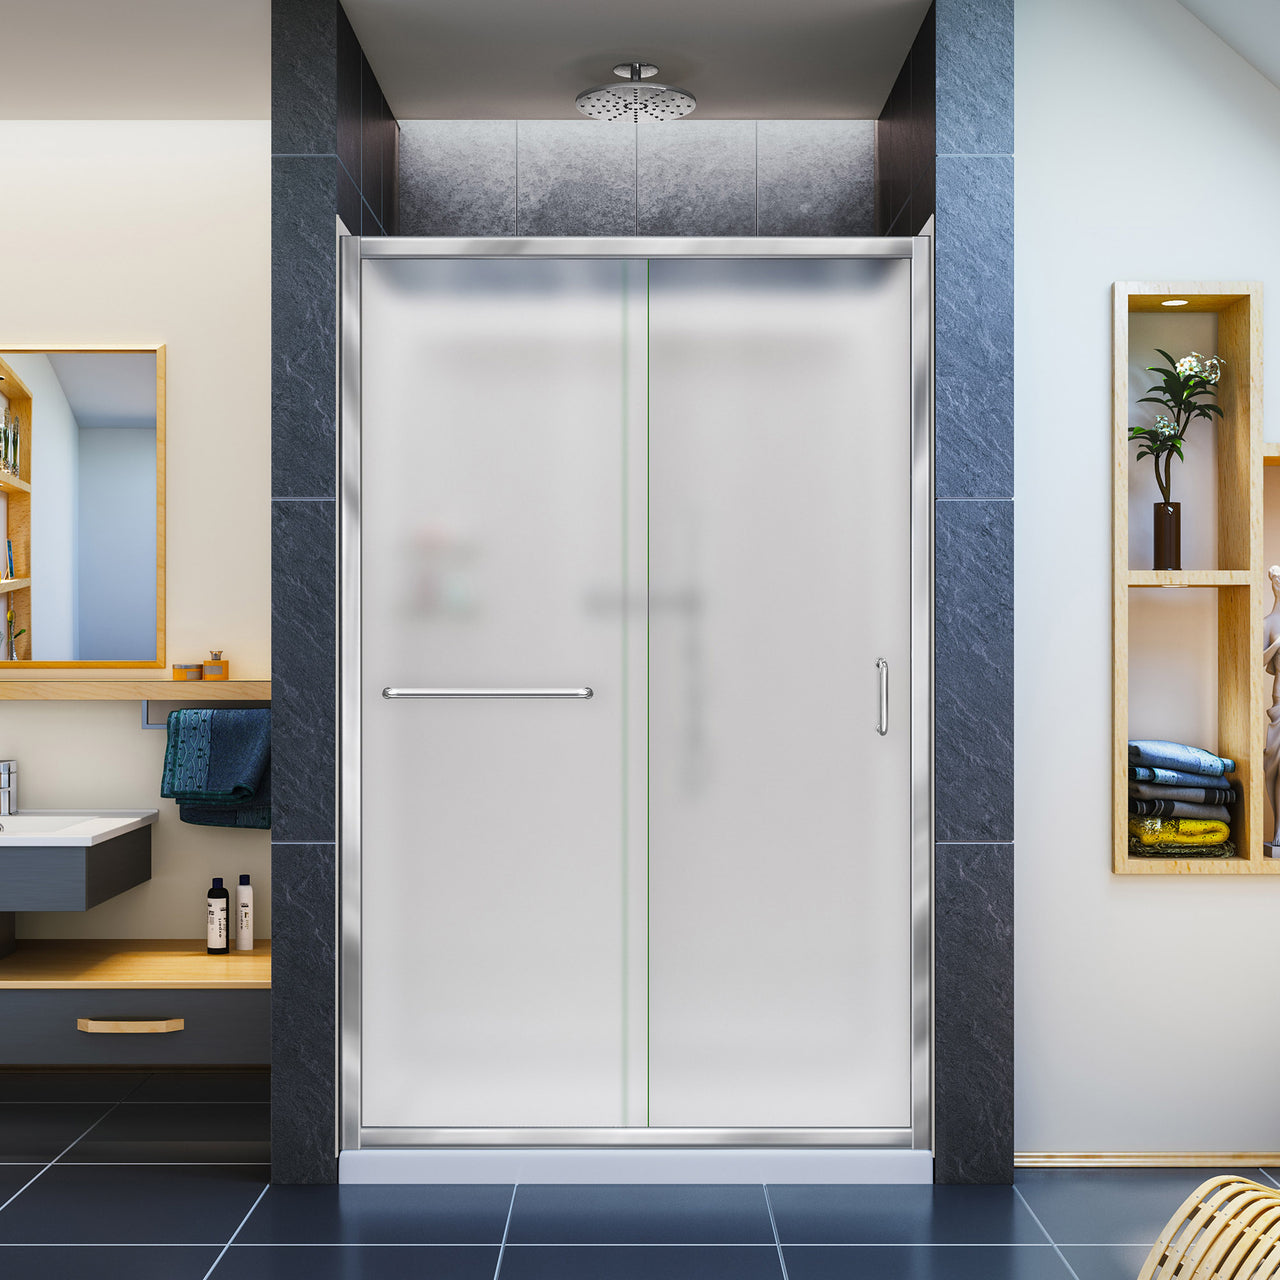 DreamLine Infinity-Z 36 in. D x 48 in. W x 76 3/4 in. H Semi-Frameless Sliding Shower Door, Shower Base and Q-WALL-5 Backwall Kit, Frosted Glass - BNGBath